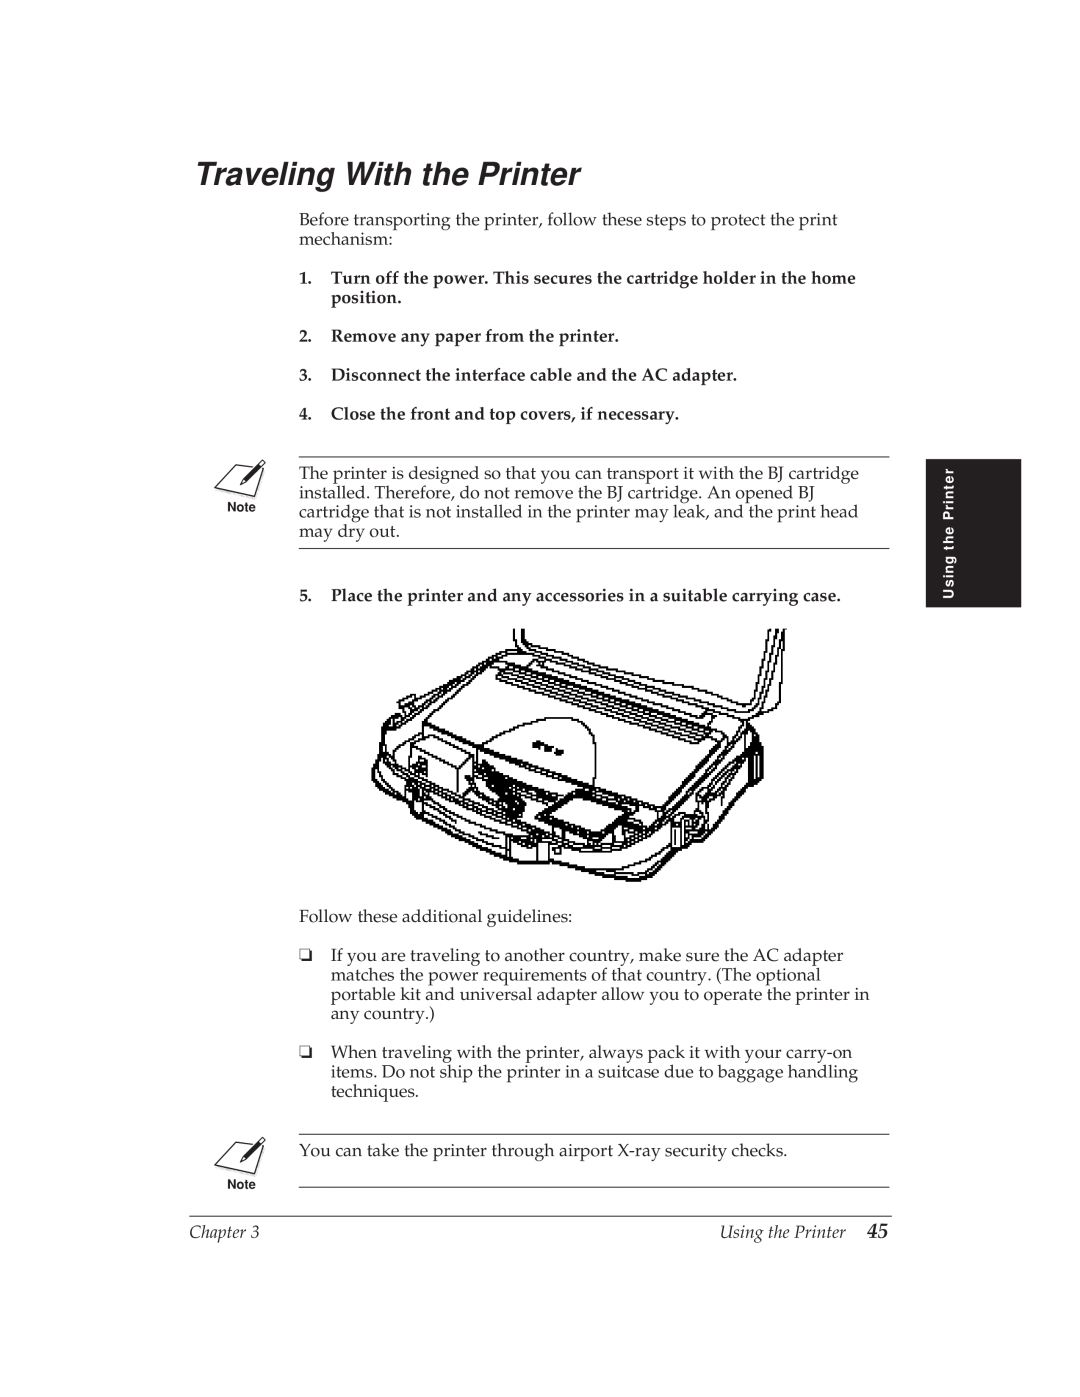 Canon BJ-30 Traveling With the Printer, Remove any paper from the printer, Close the front and top covers, if necessary 